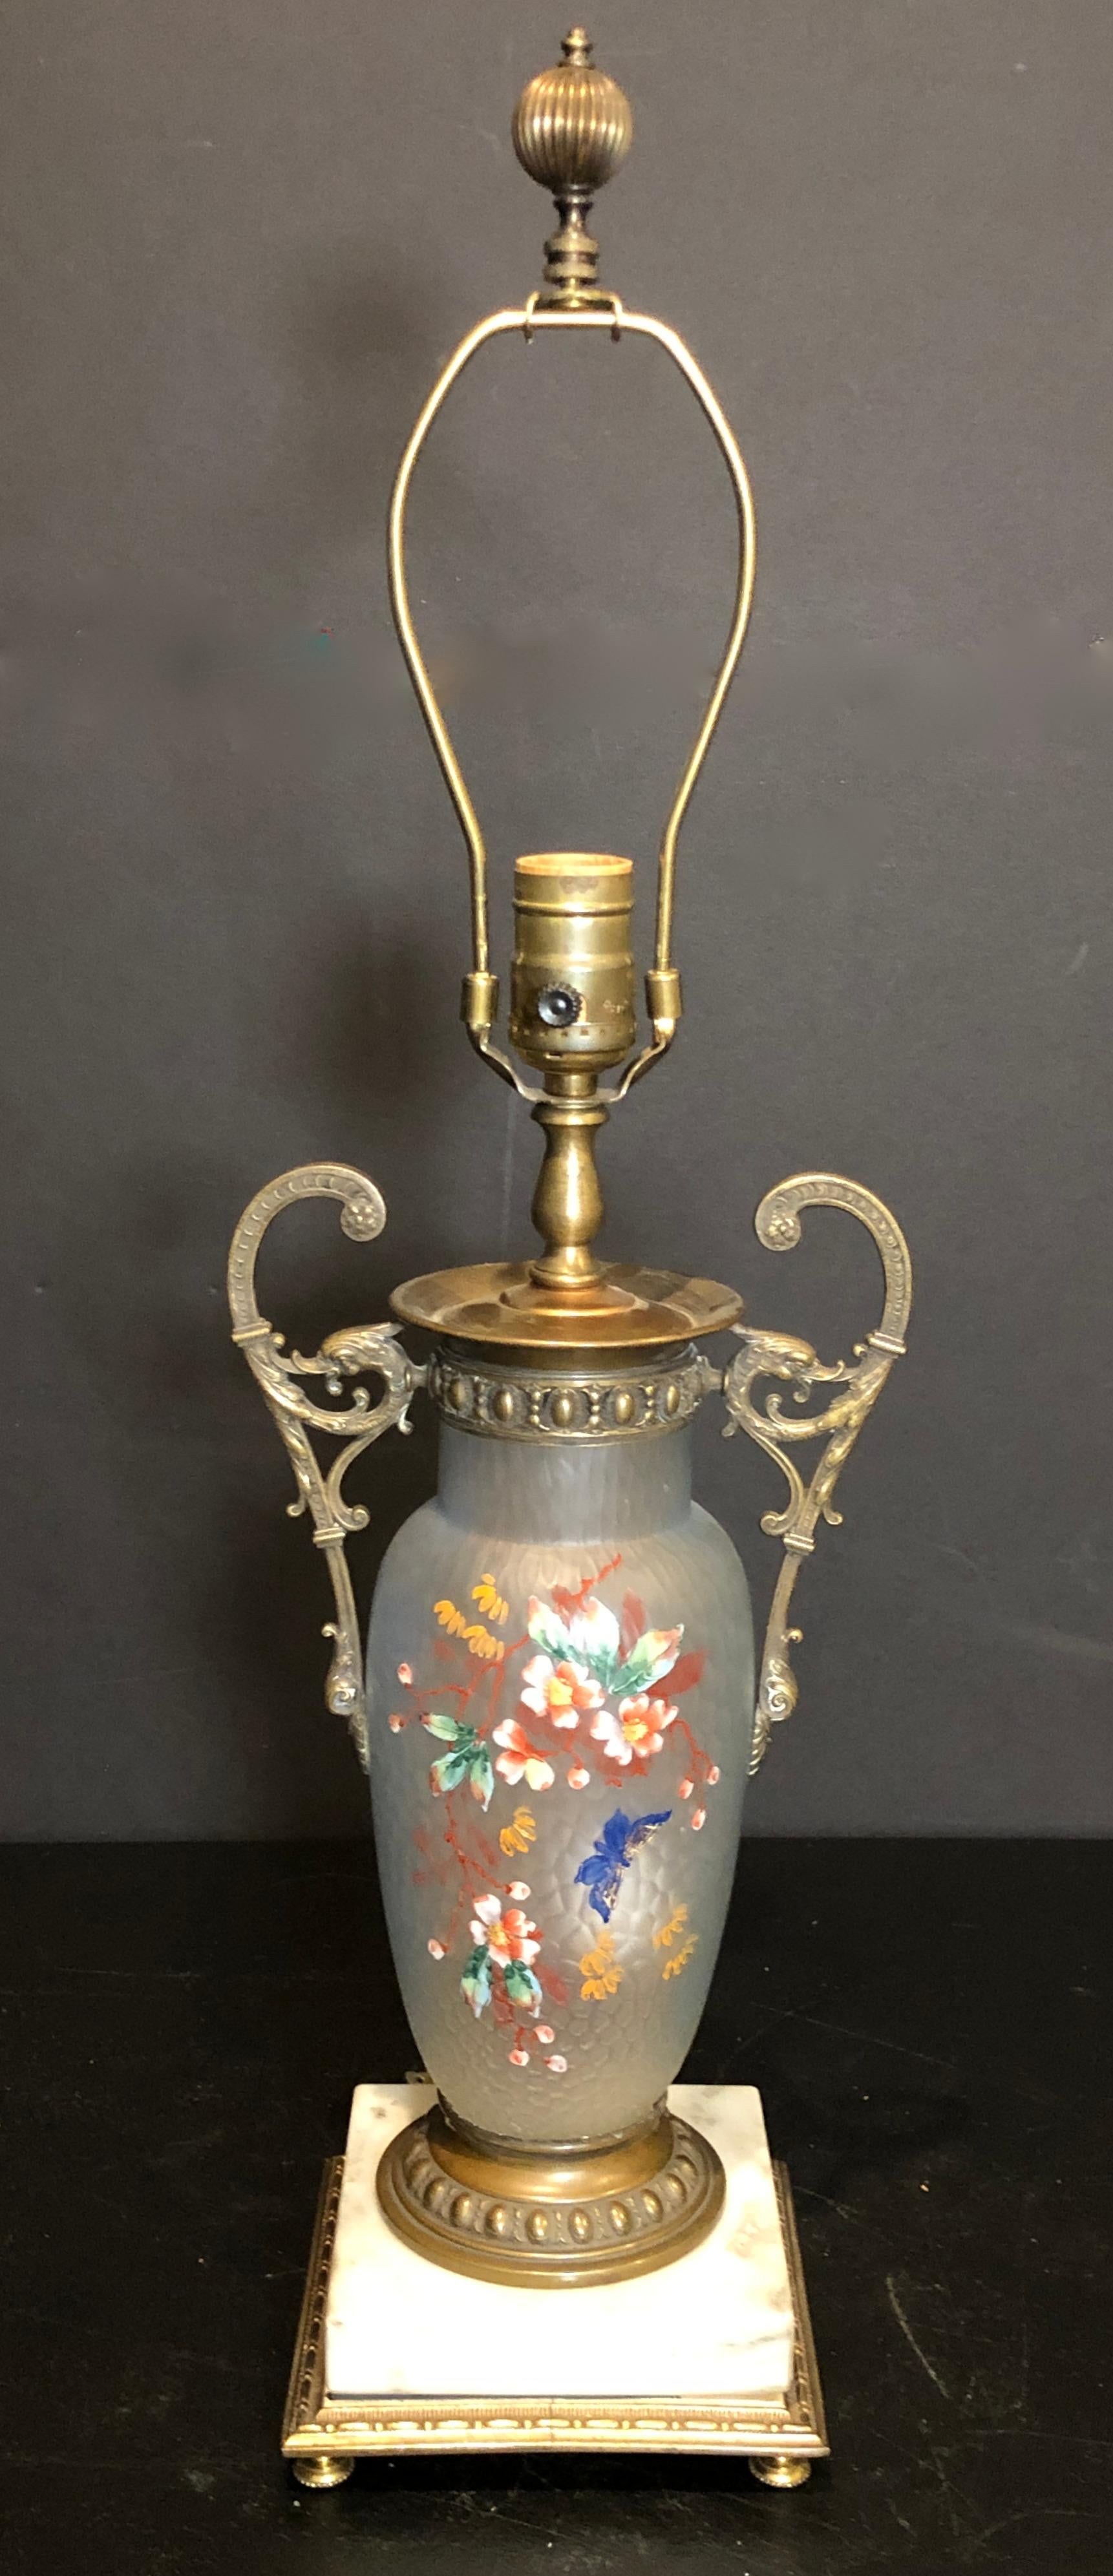 Enameled bronze mounted glass vase as lamp. English Victorian chinoiserie enameled florals with butterfly. Colorful enamel on clear satin textured glass. Bronze handles with griffin heads. White marble base.
14